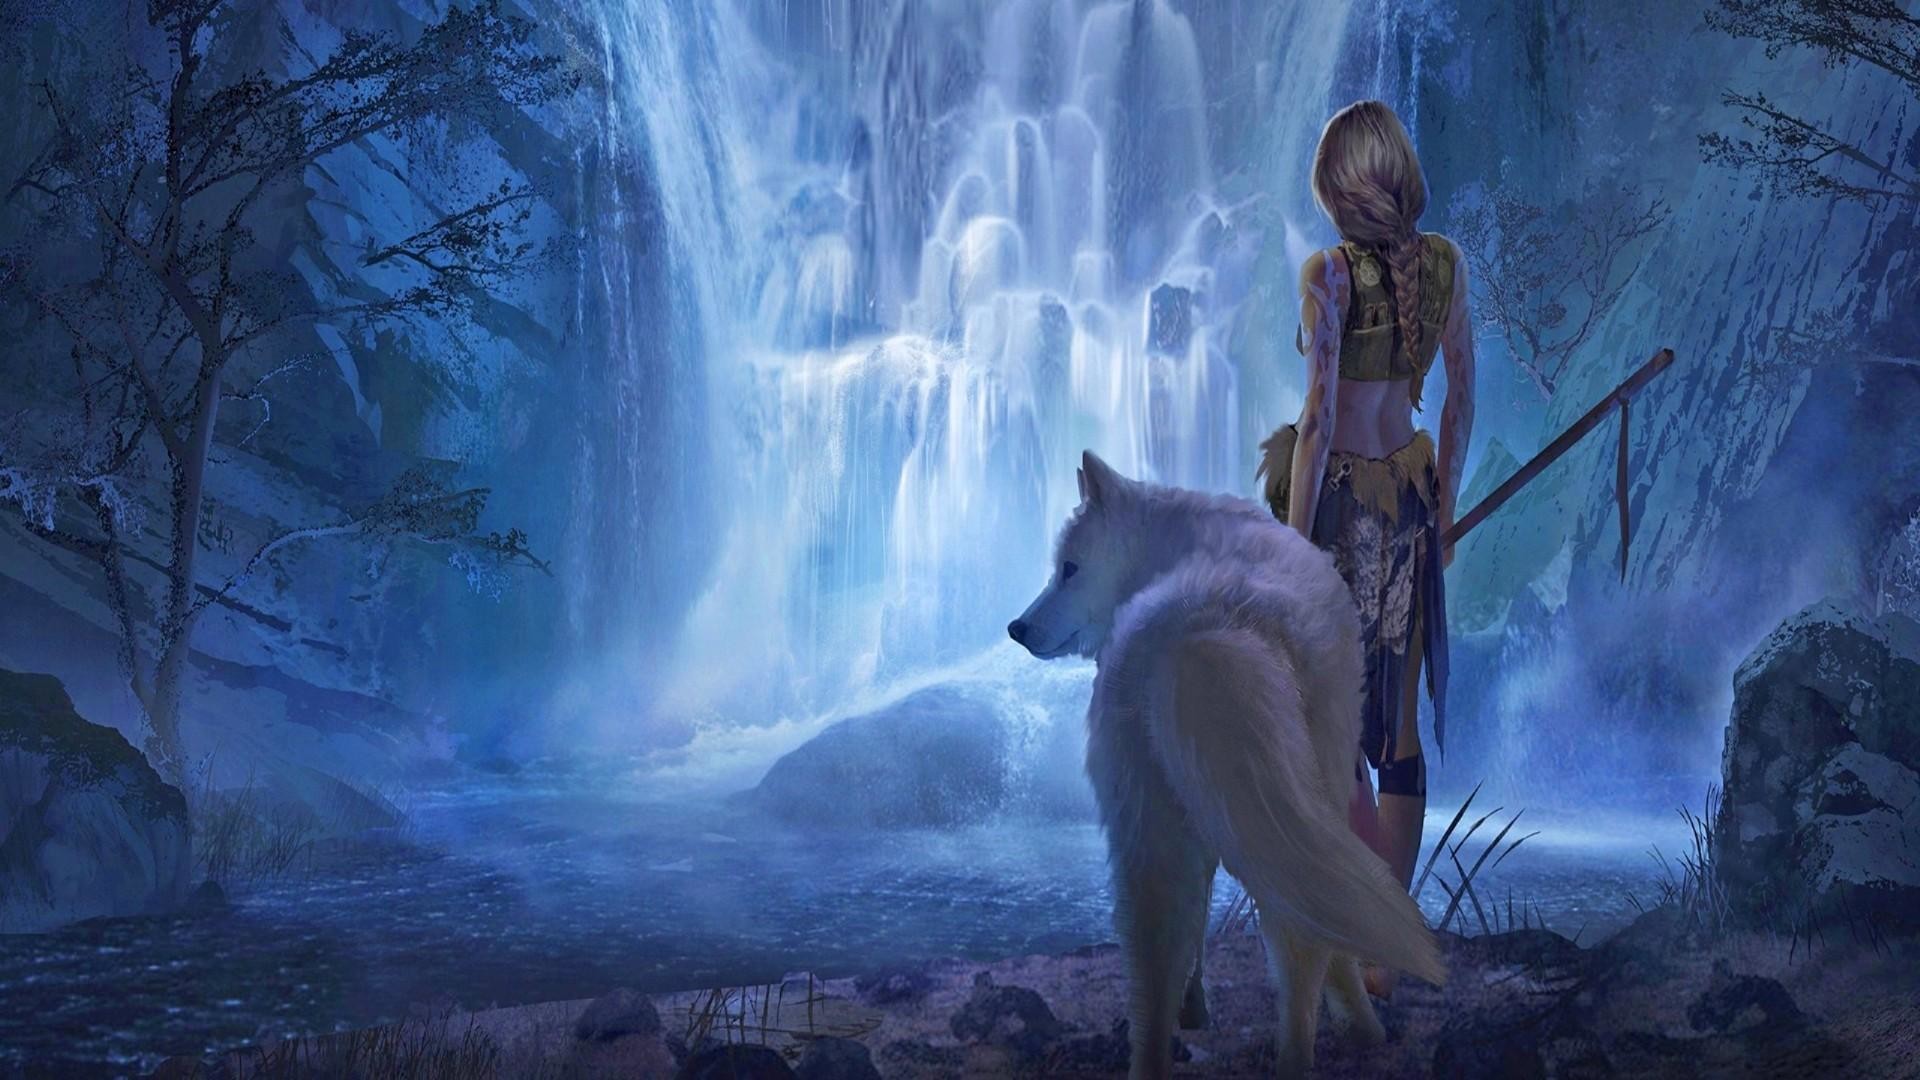 1920x1080 White wolf with a warrior girl at the waterfall - Fantasy Art wallpaper